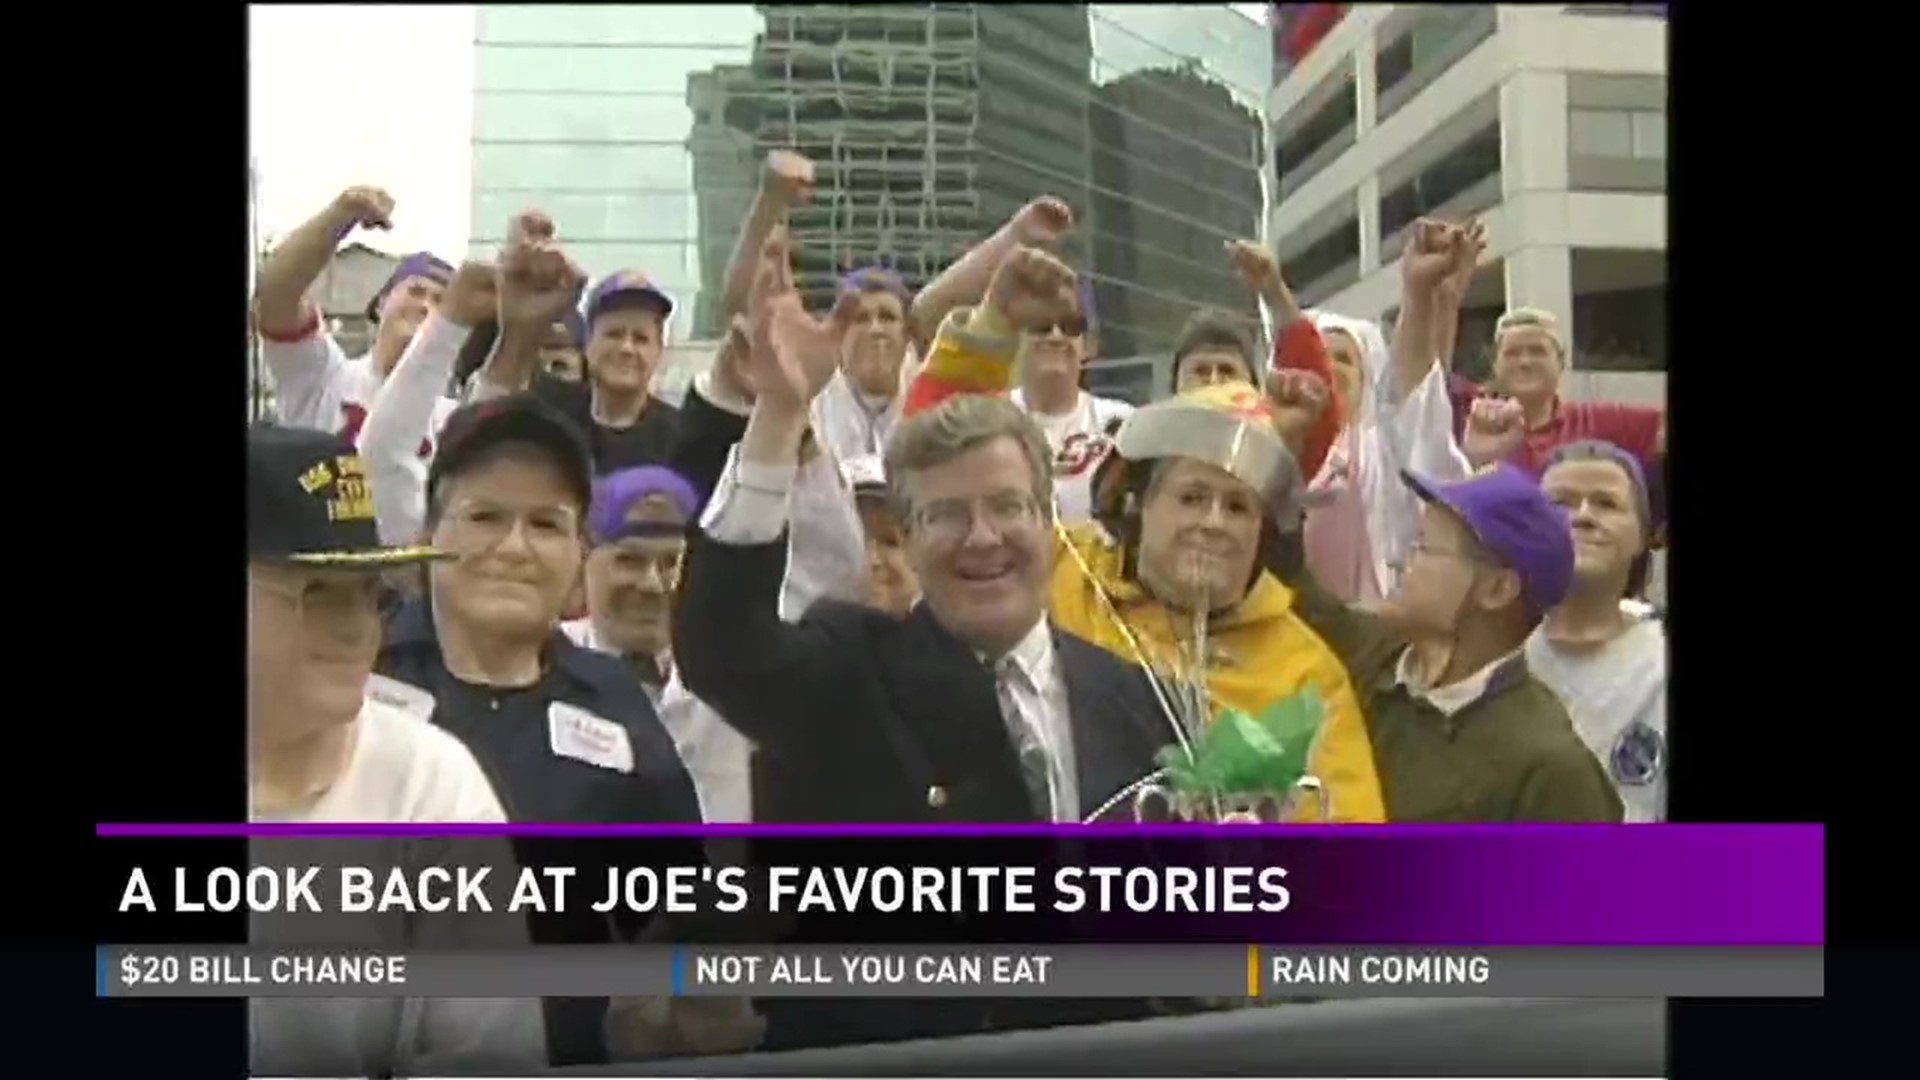 13News Now is preparing to say goodbye to longtime reporter Joe Flanagan and this story takes a look back at one of Joe's favorite stories during his time at ABC13.